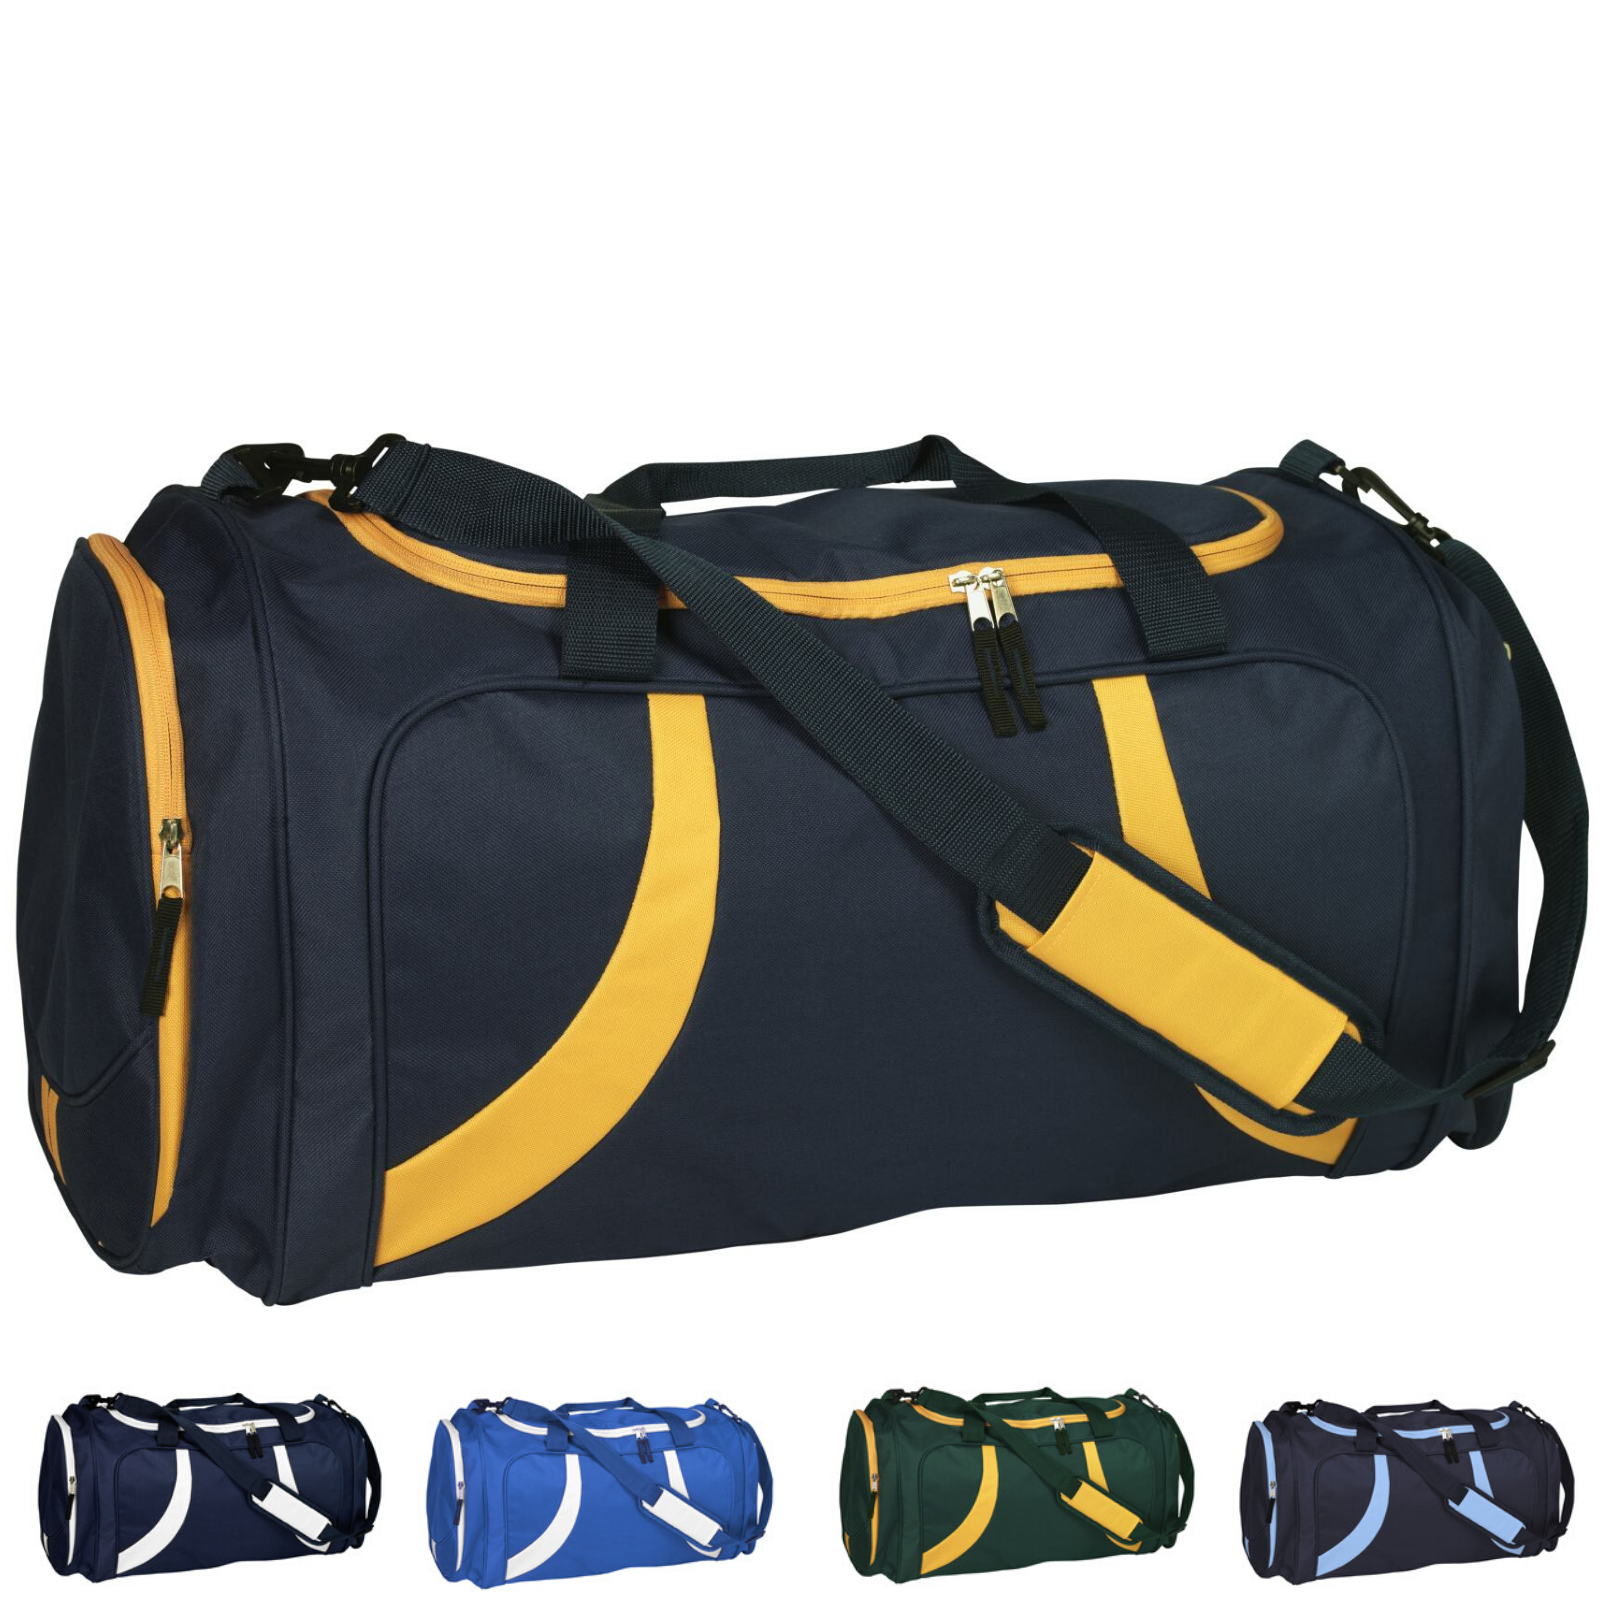 travel bags at total sports